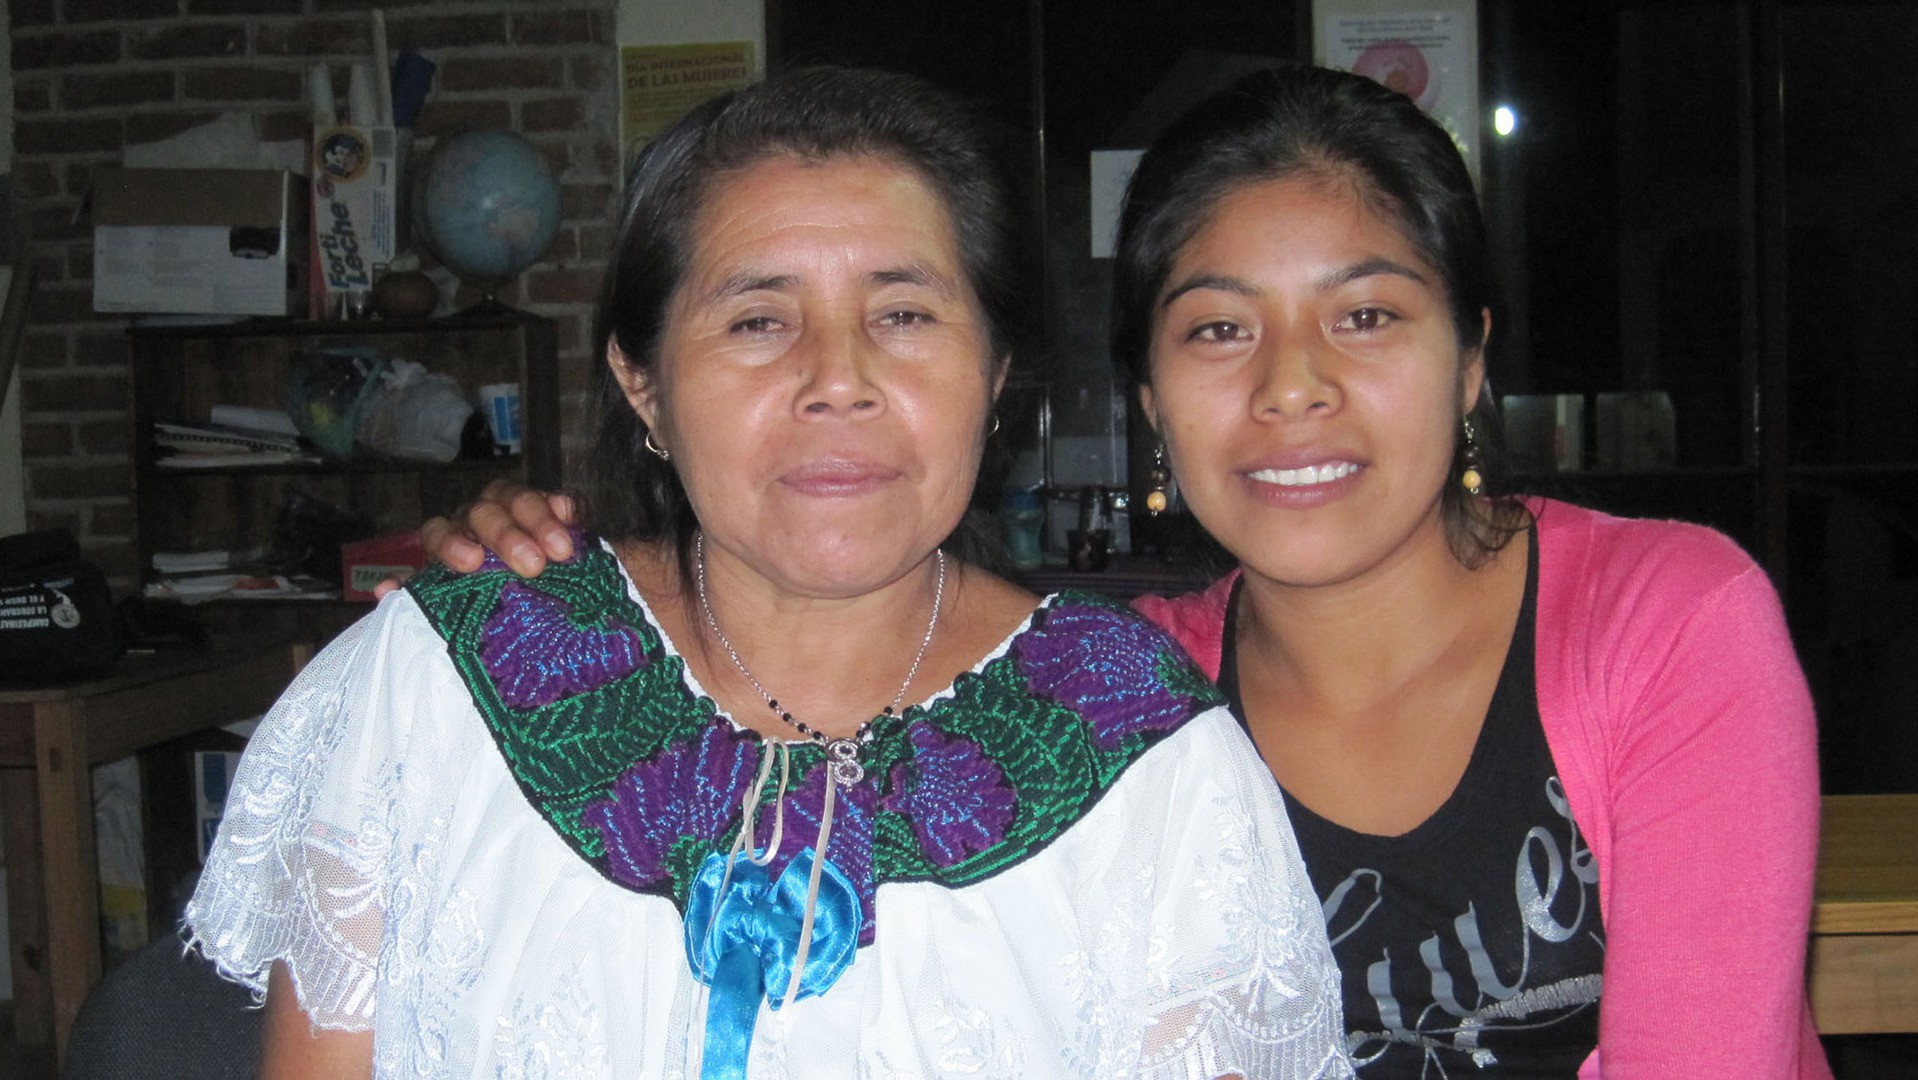 Pascuala Pérez Gutierrez and Margarita Vásquez Boloma work with the Fray Pedro de la Nada Committee for Human Rights to educate indigenous women about their rights. (Photo by Laurie Liles.)